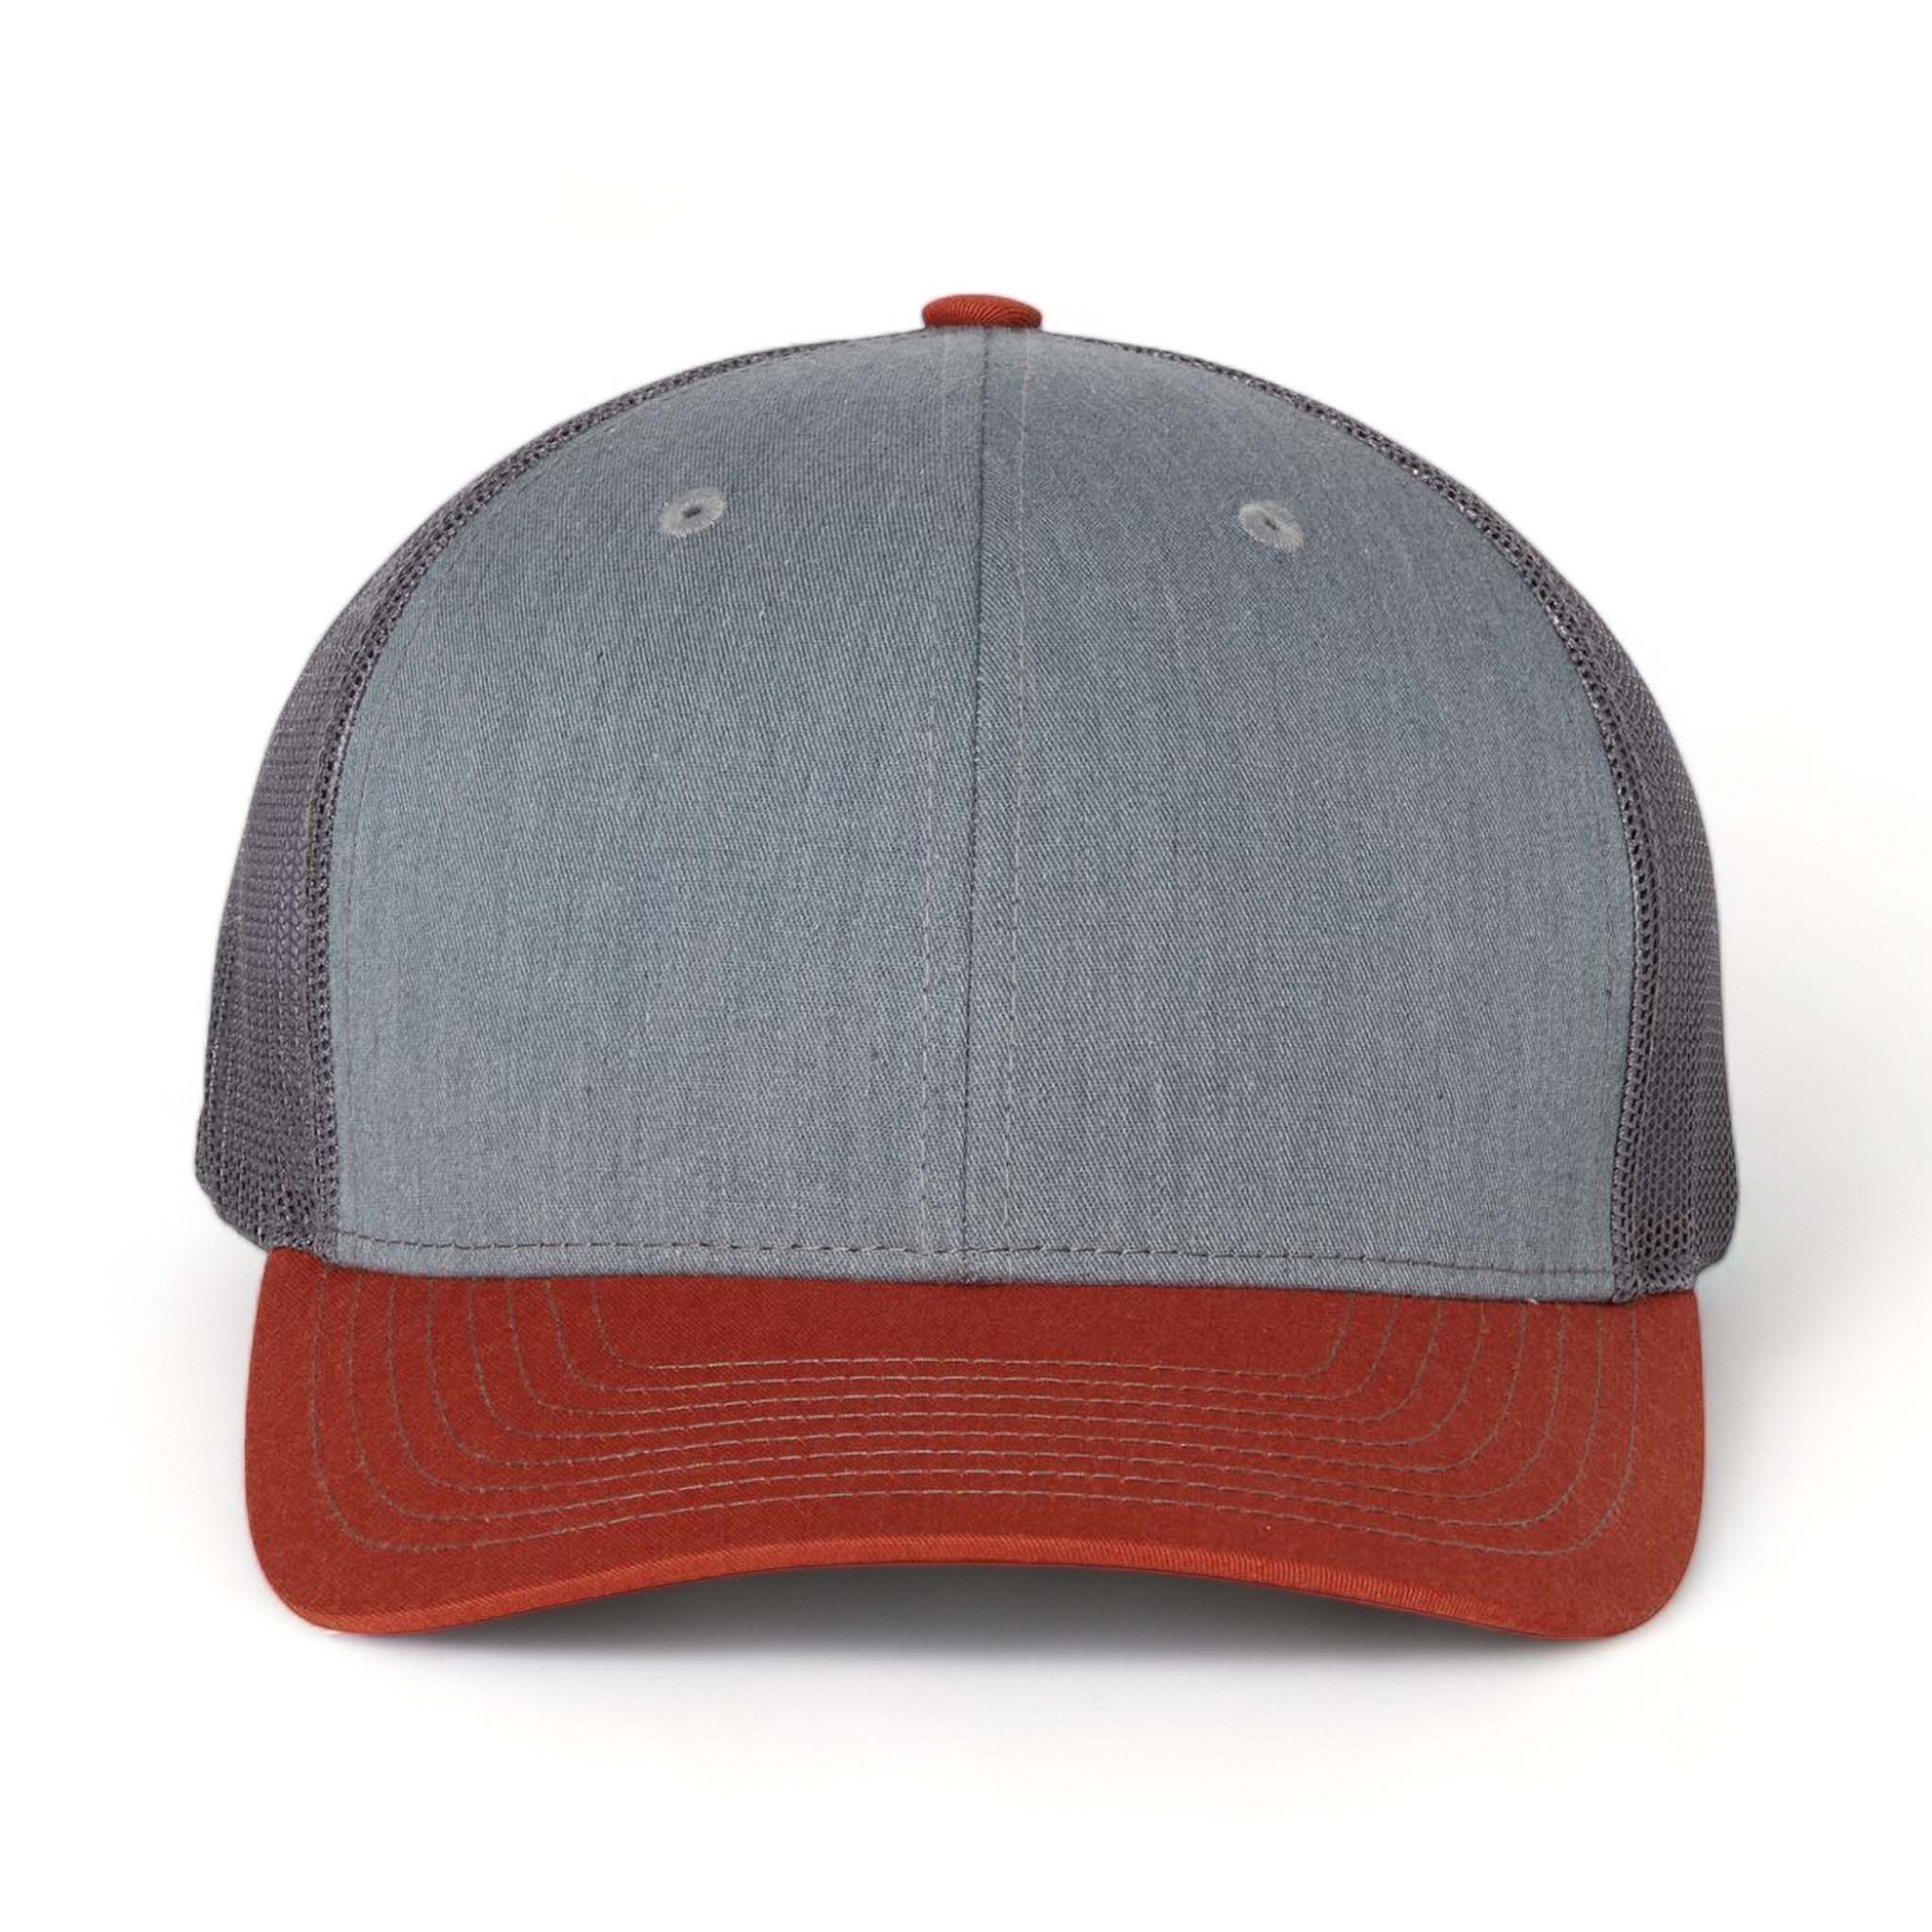 Front view of Richardson 112 custom hat in heather grey, charcoal and dark orange